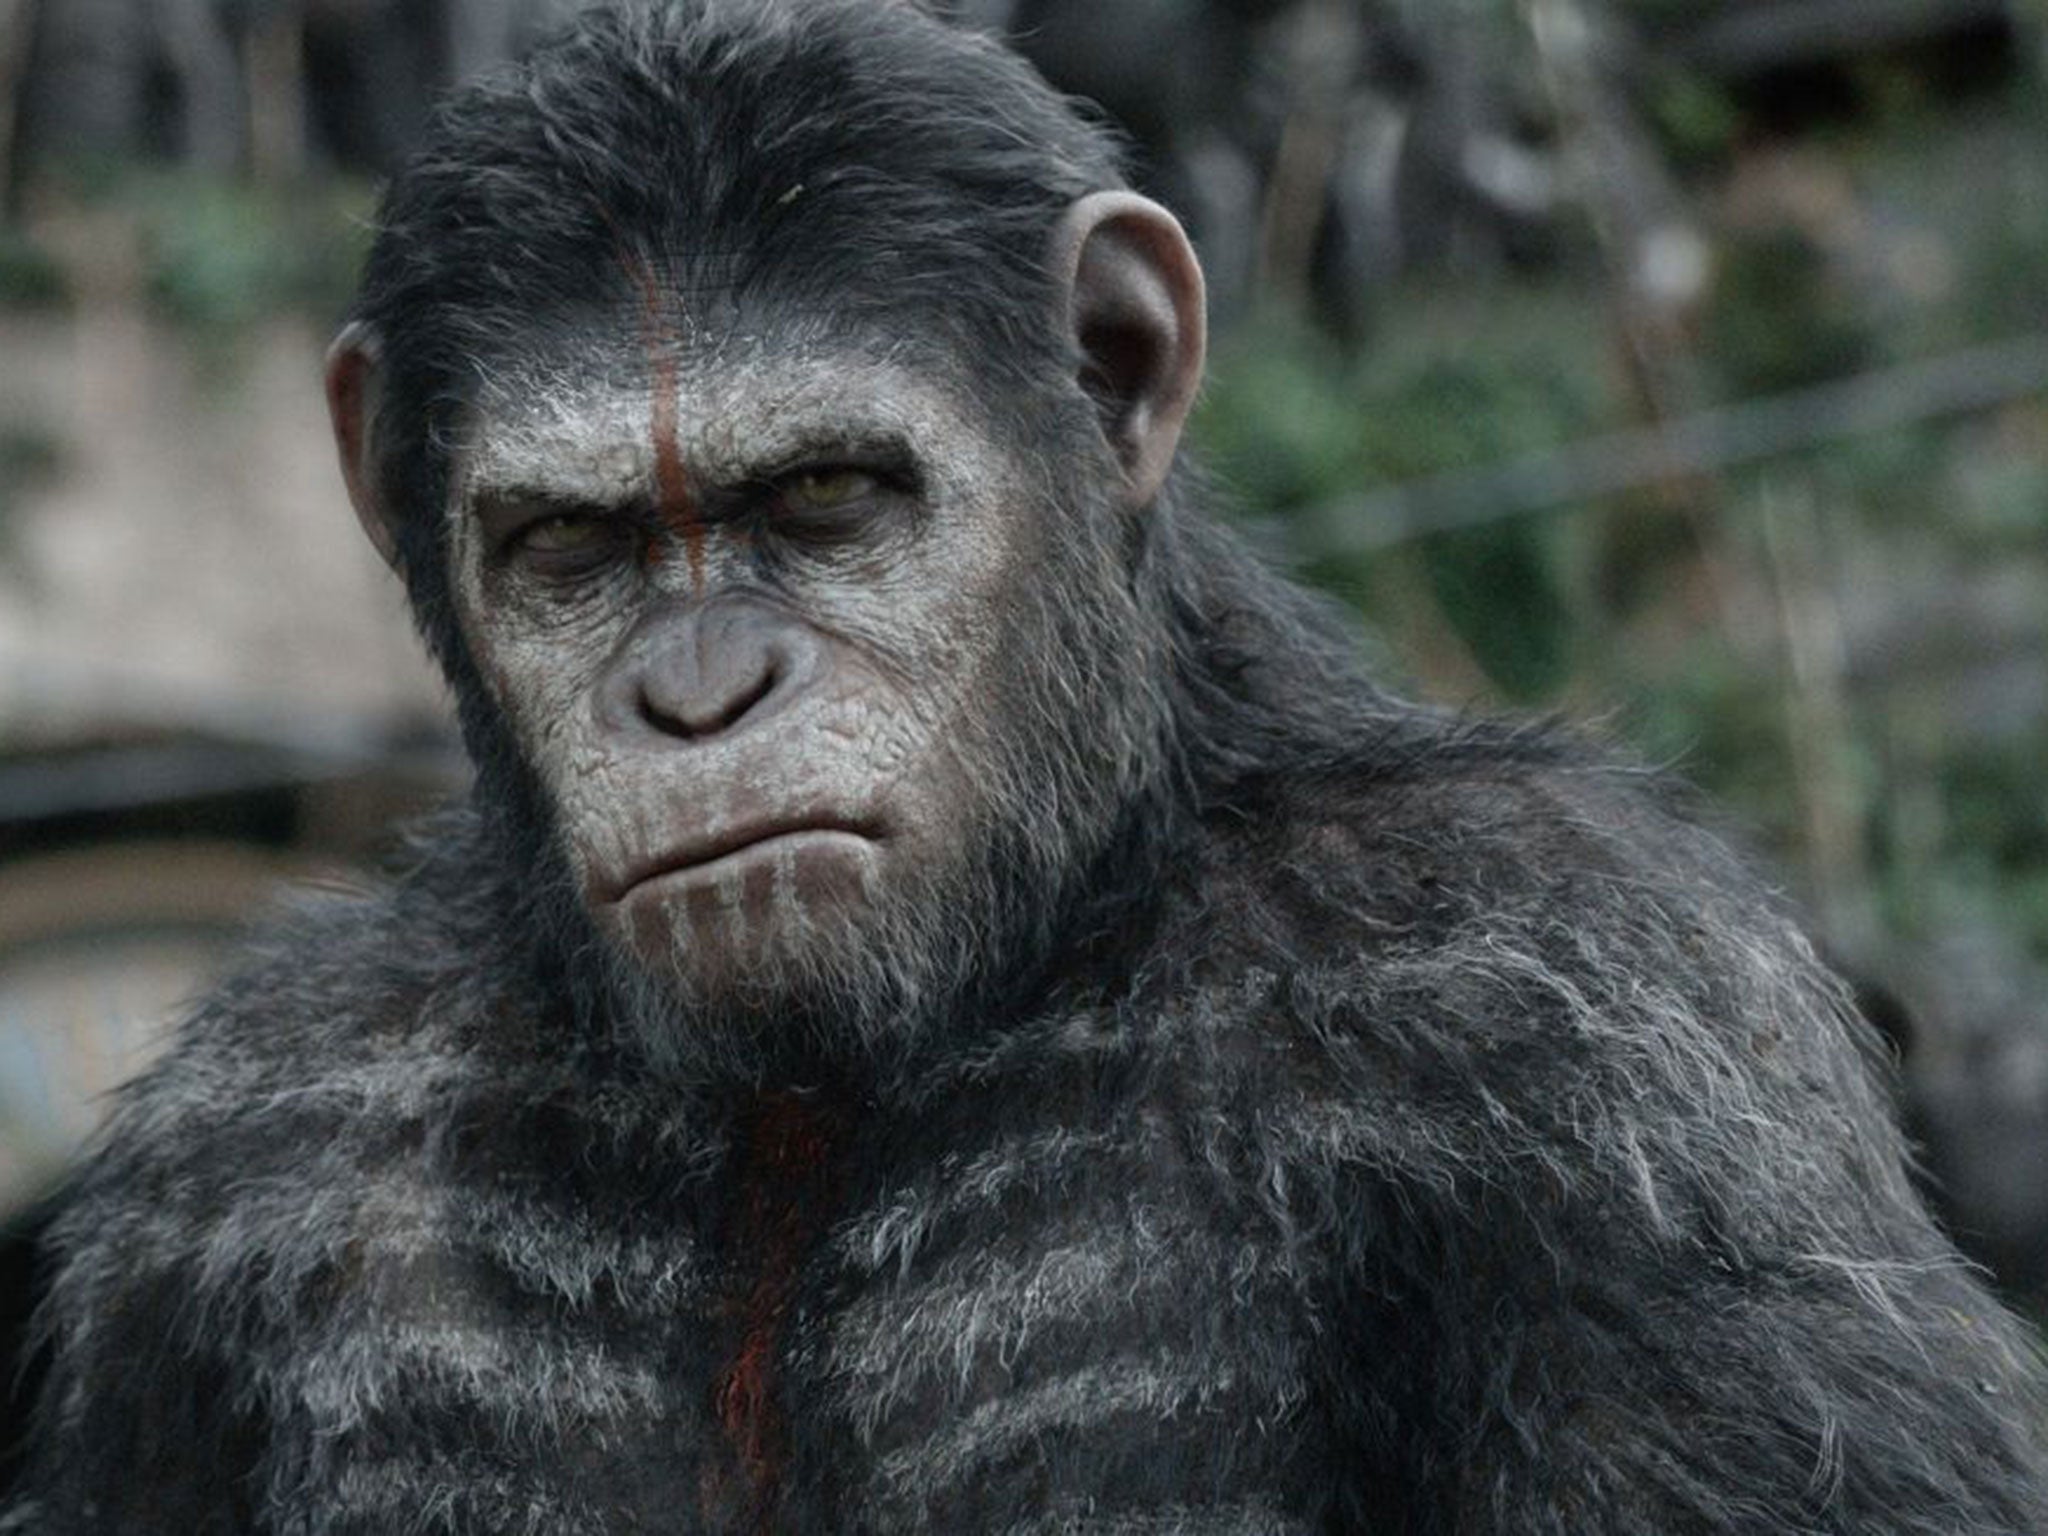 Who plays the intelligent chimp Caesar in the most recent Planet of the Apes films?